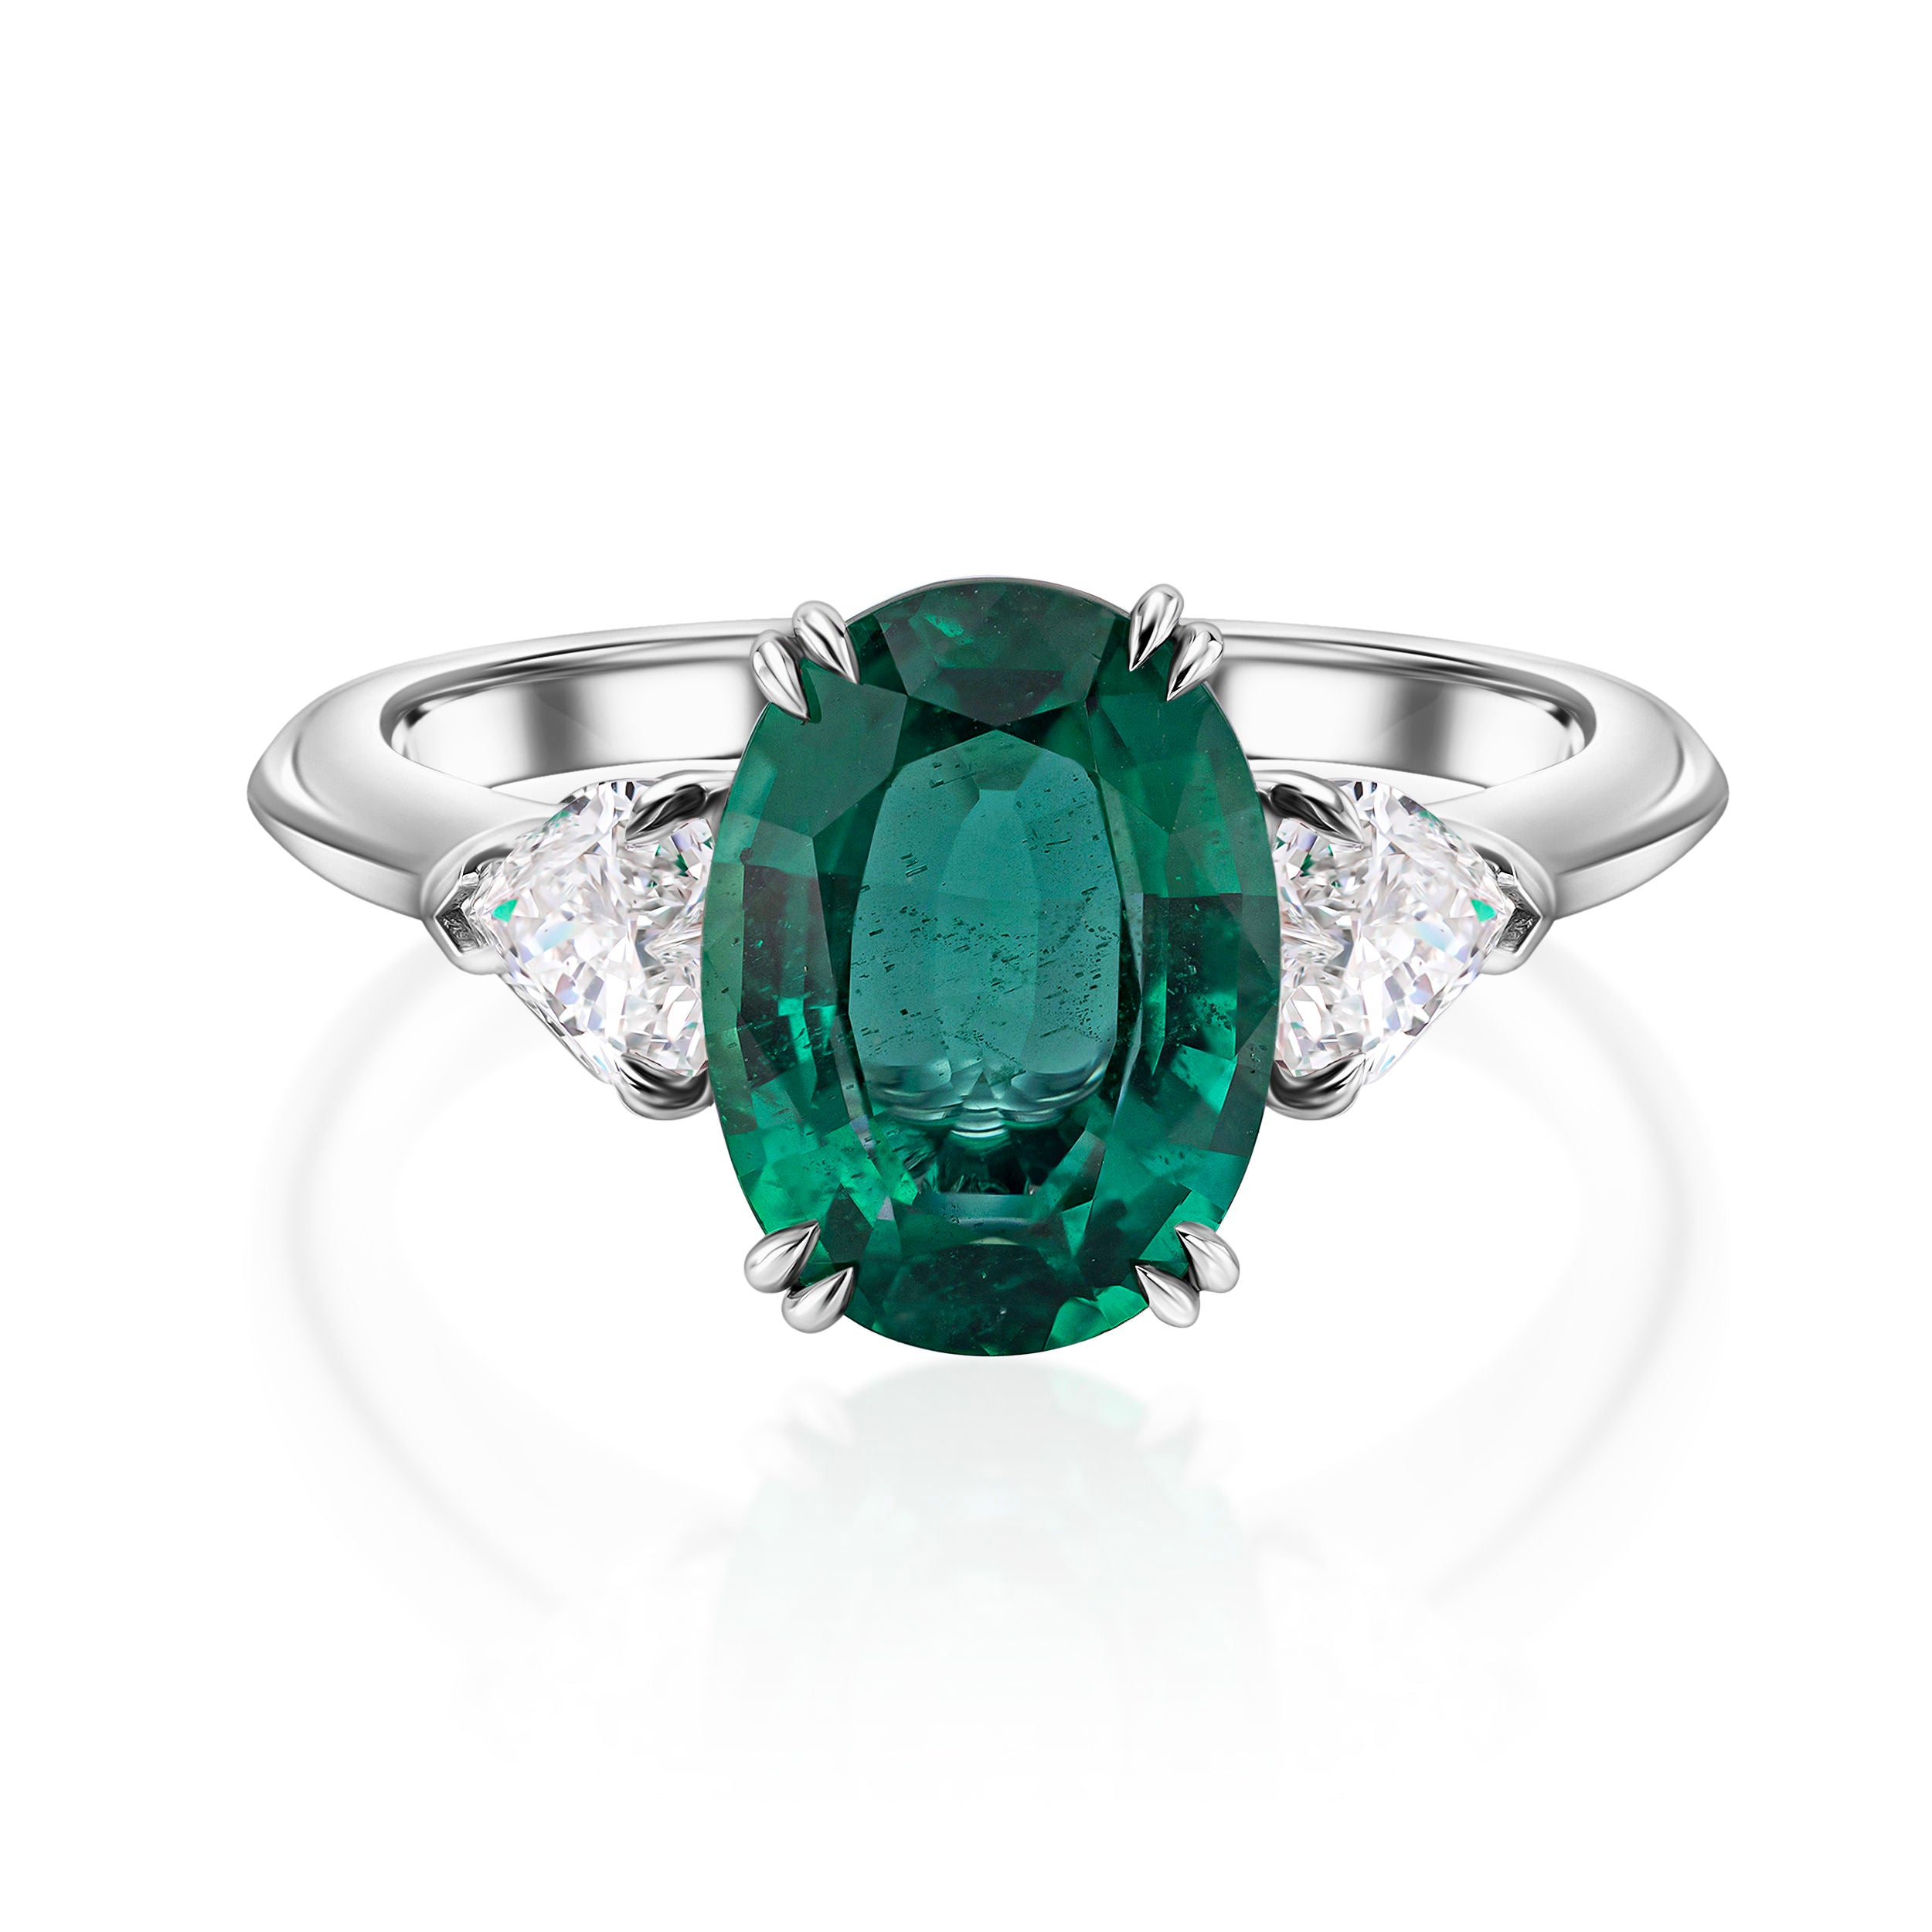 Oval Emerald Ring with Heart Shapes - 3.19ct TW